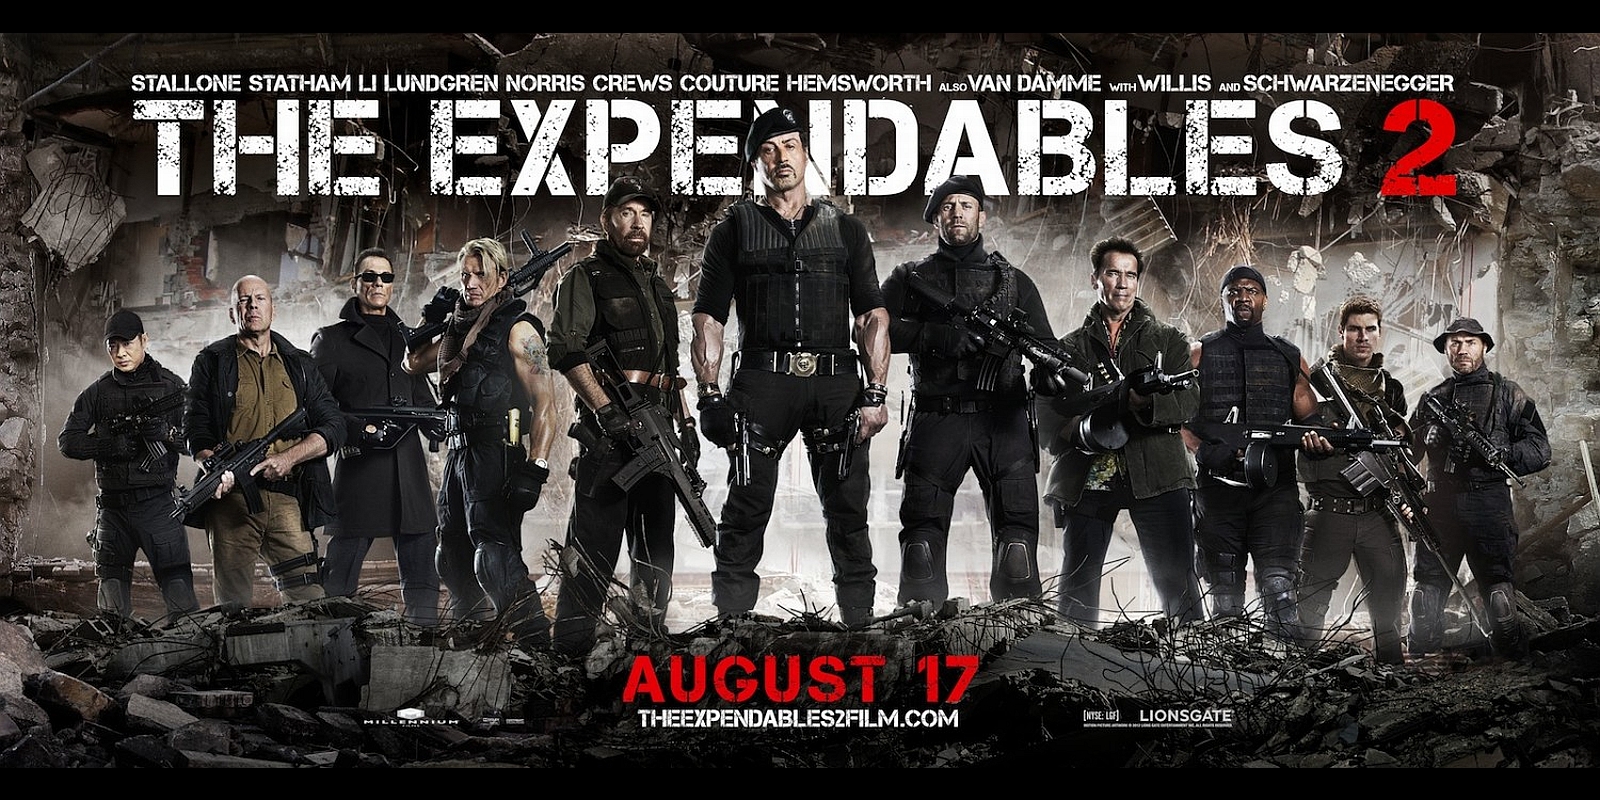 the expendables, movie, the expendables 2, arnold schwarzenegger, barney ross, billy (the expendables), booker (the expendables), bruce willis, chuck norris, church (the expendables), dolph lundgren, gunnar jensen, hale caesar, jason statham, jean claude van damme, jet li, lee christmas, liam hemsworth, randy couture, sylvester stallone, terry crews, toll road, trench (the expendables), vilain (the expendables), yin yang (the expendables) download HD wallpaper